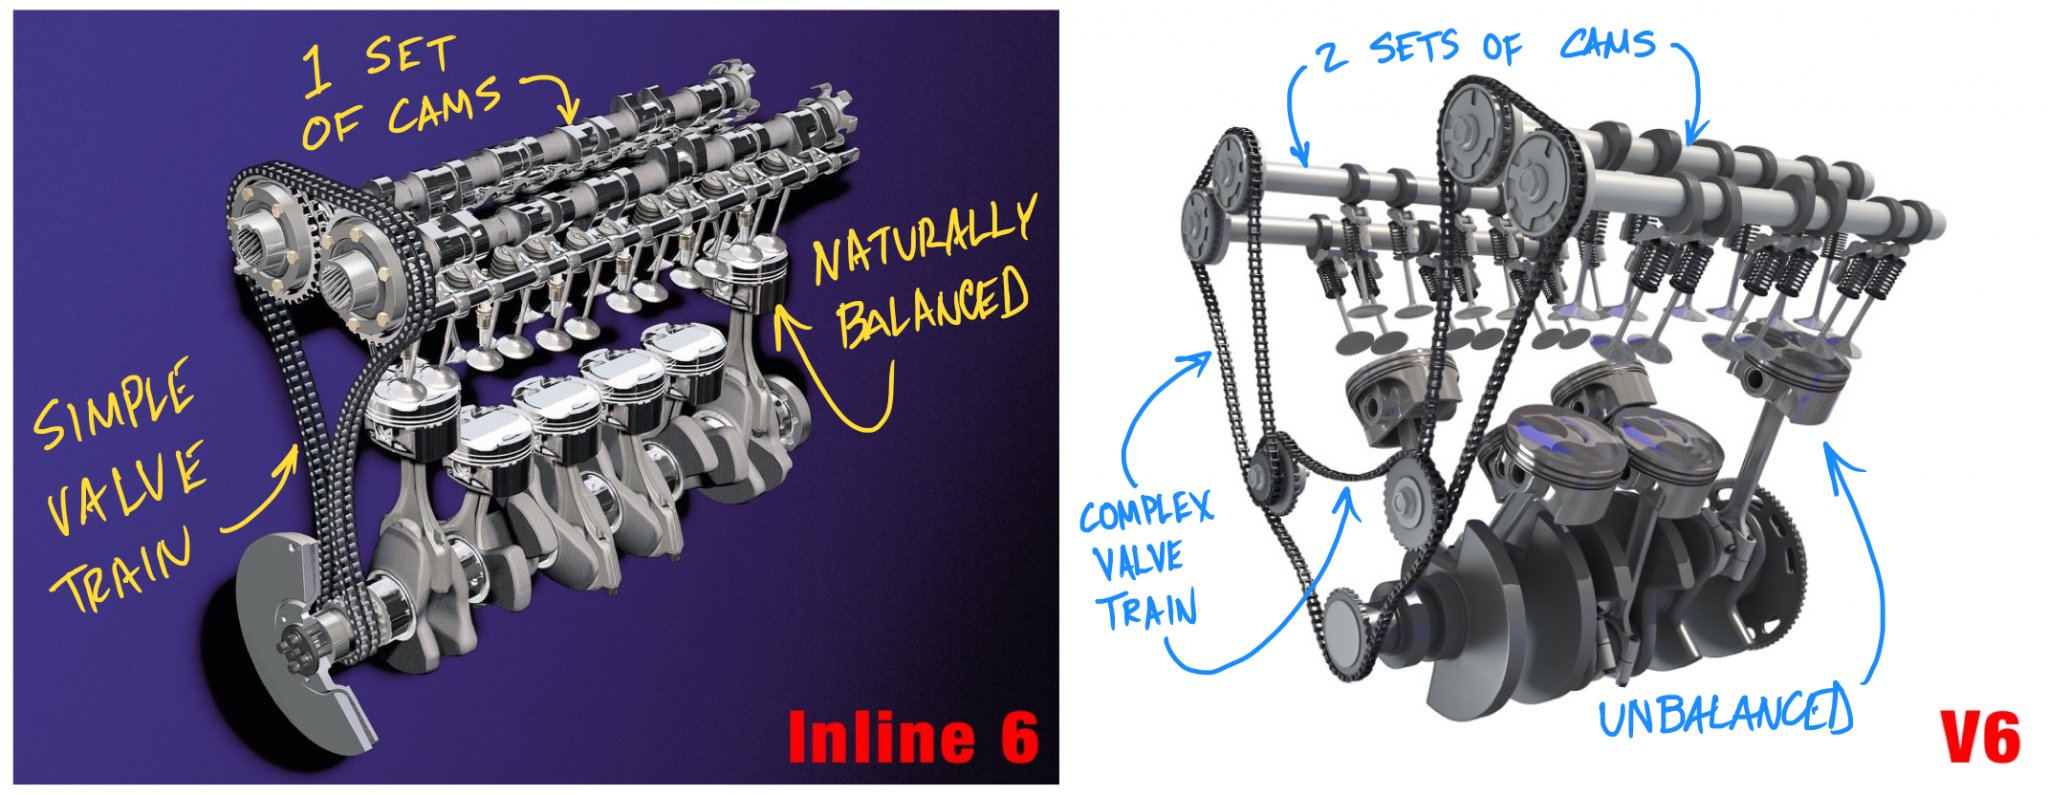 Why Bmw Uses An Inline Six Motor Advantages